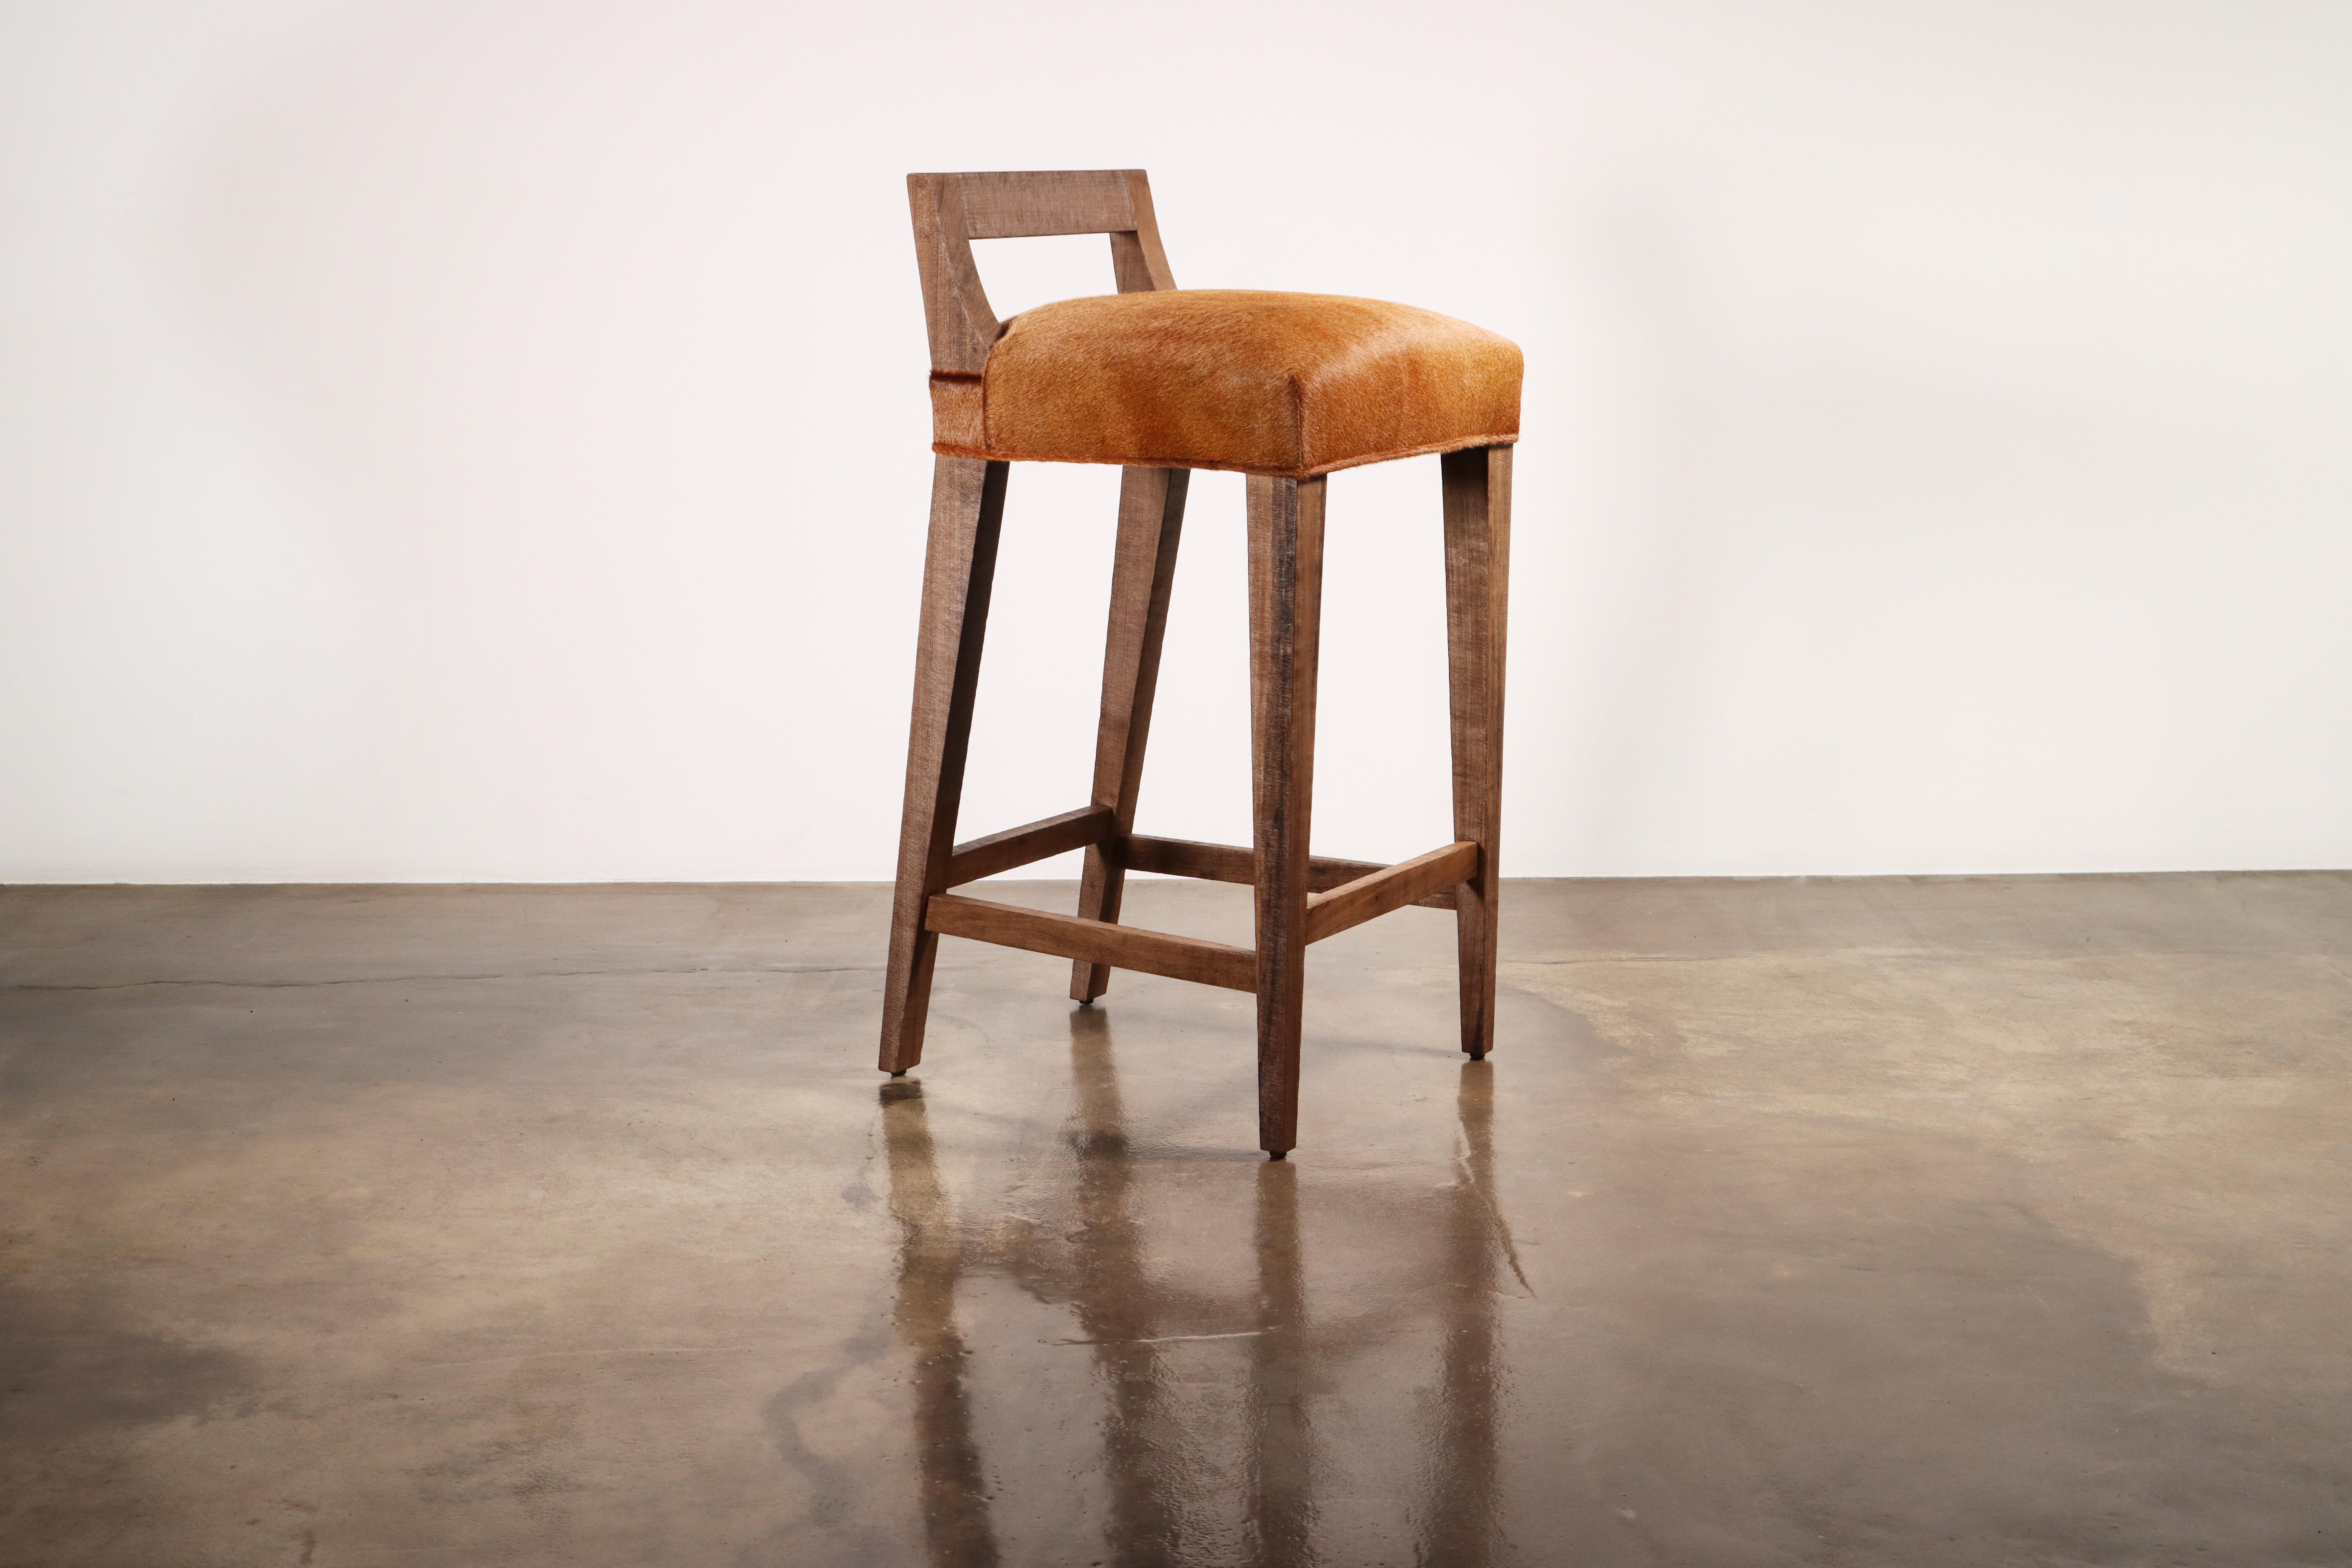 The Ecco Stool features a low, open, angular single slat back that can be easily handled for moving them around. Available in counter or bar height and your choice of upholstery. Shown in hair hide leather with an aged wood finish.  

About